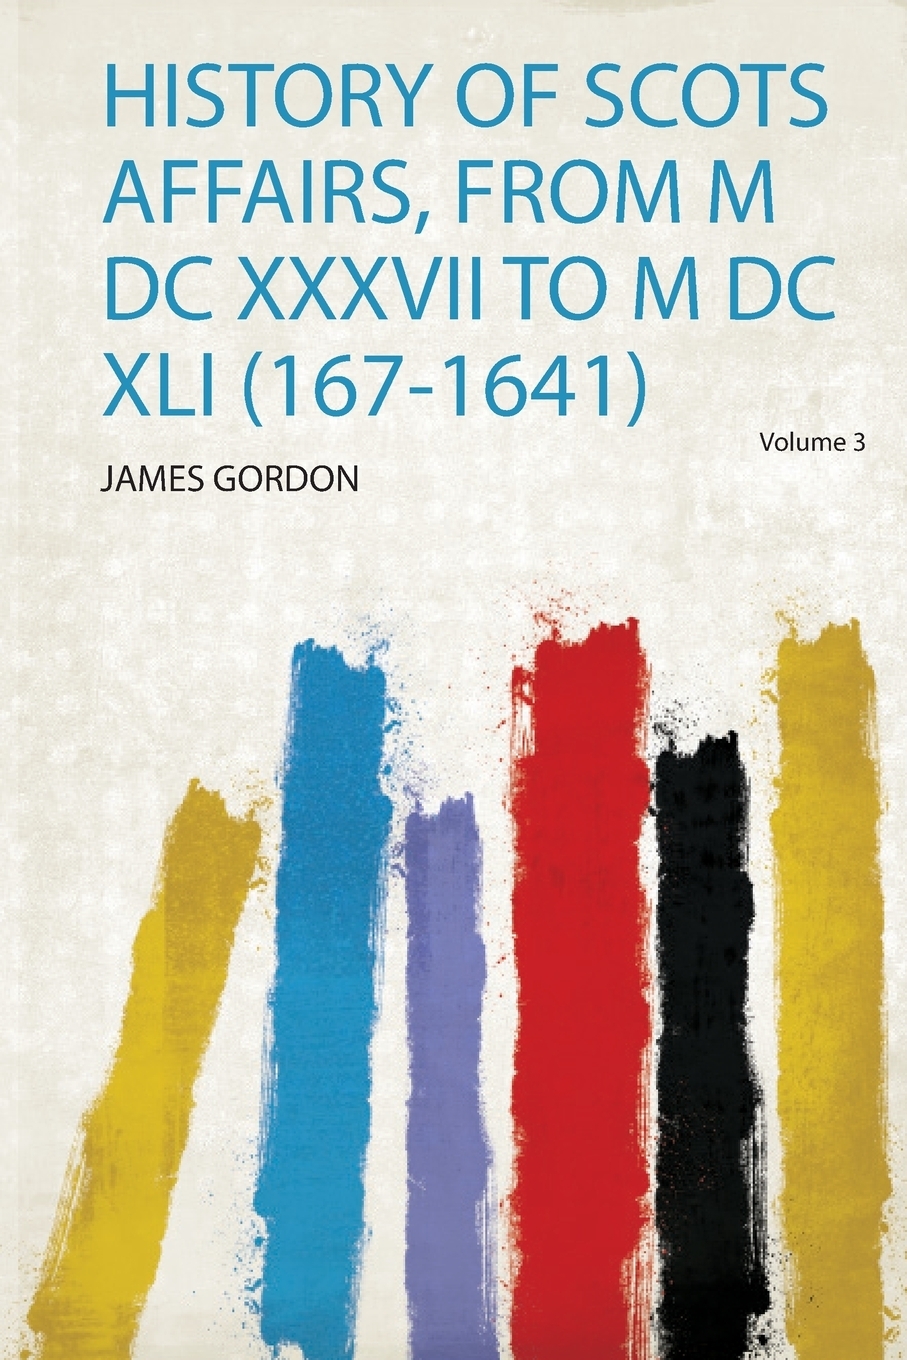 History of Scots Affairs, from M Dc Xxxvii to M Dc Xli (167-1641)